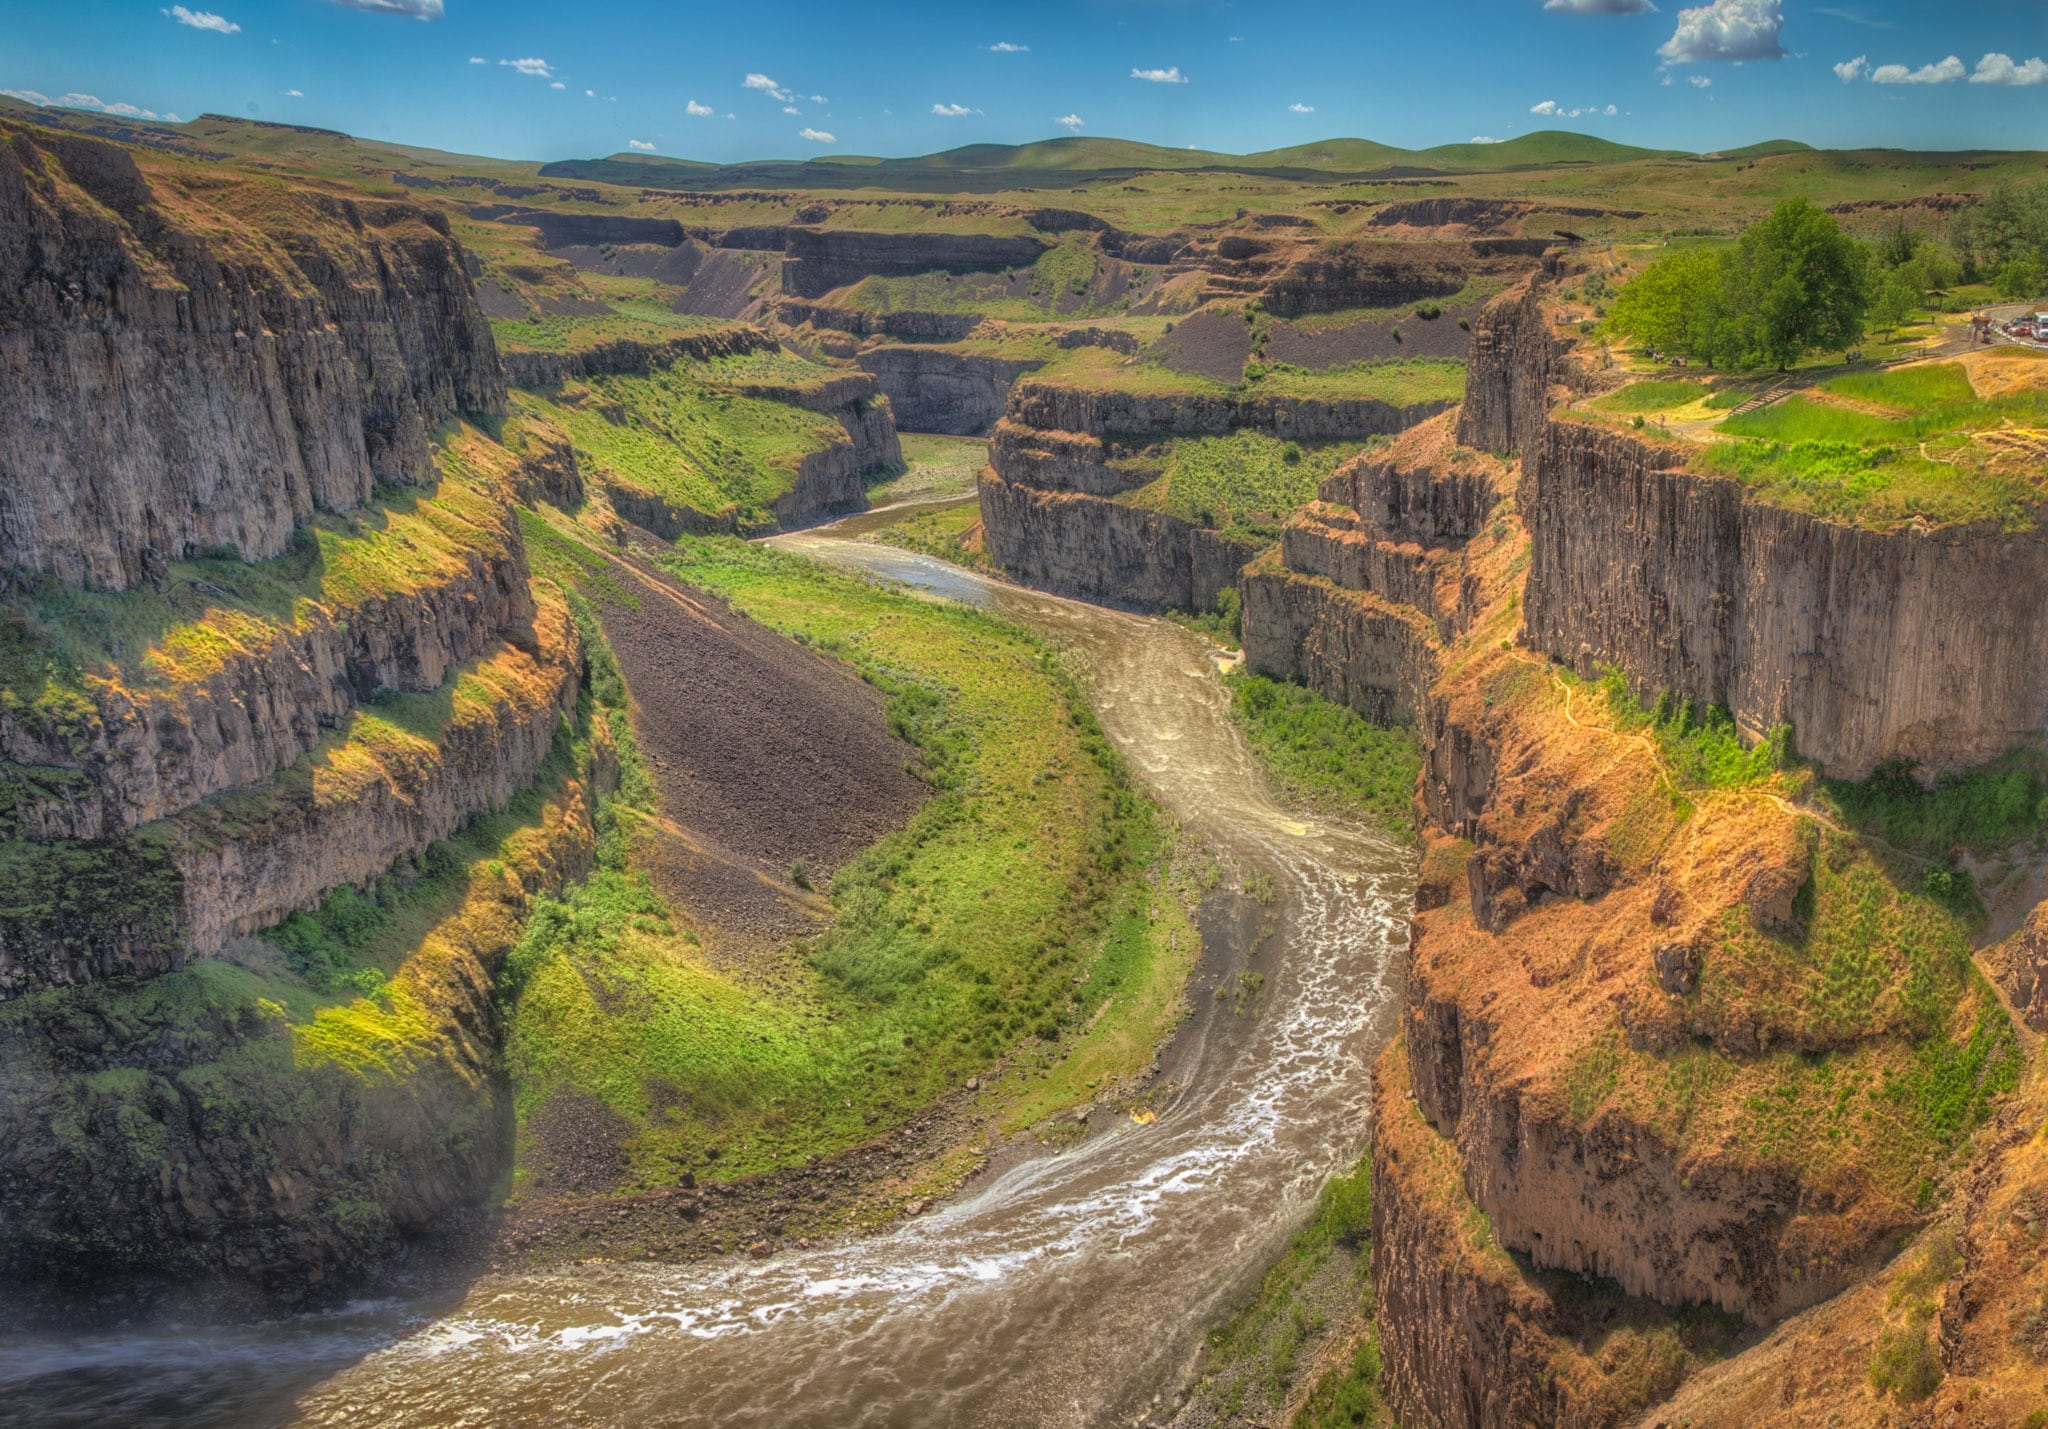 This is the columnar Bassalt canyon of the Palouse River after it flows over Palouse Falls in Palouse Falls State Park near Spokane, Washington.